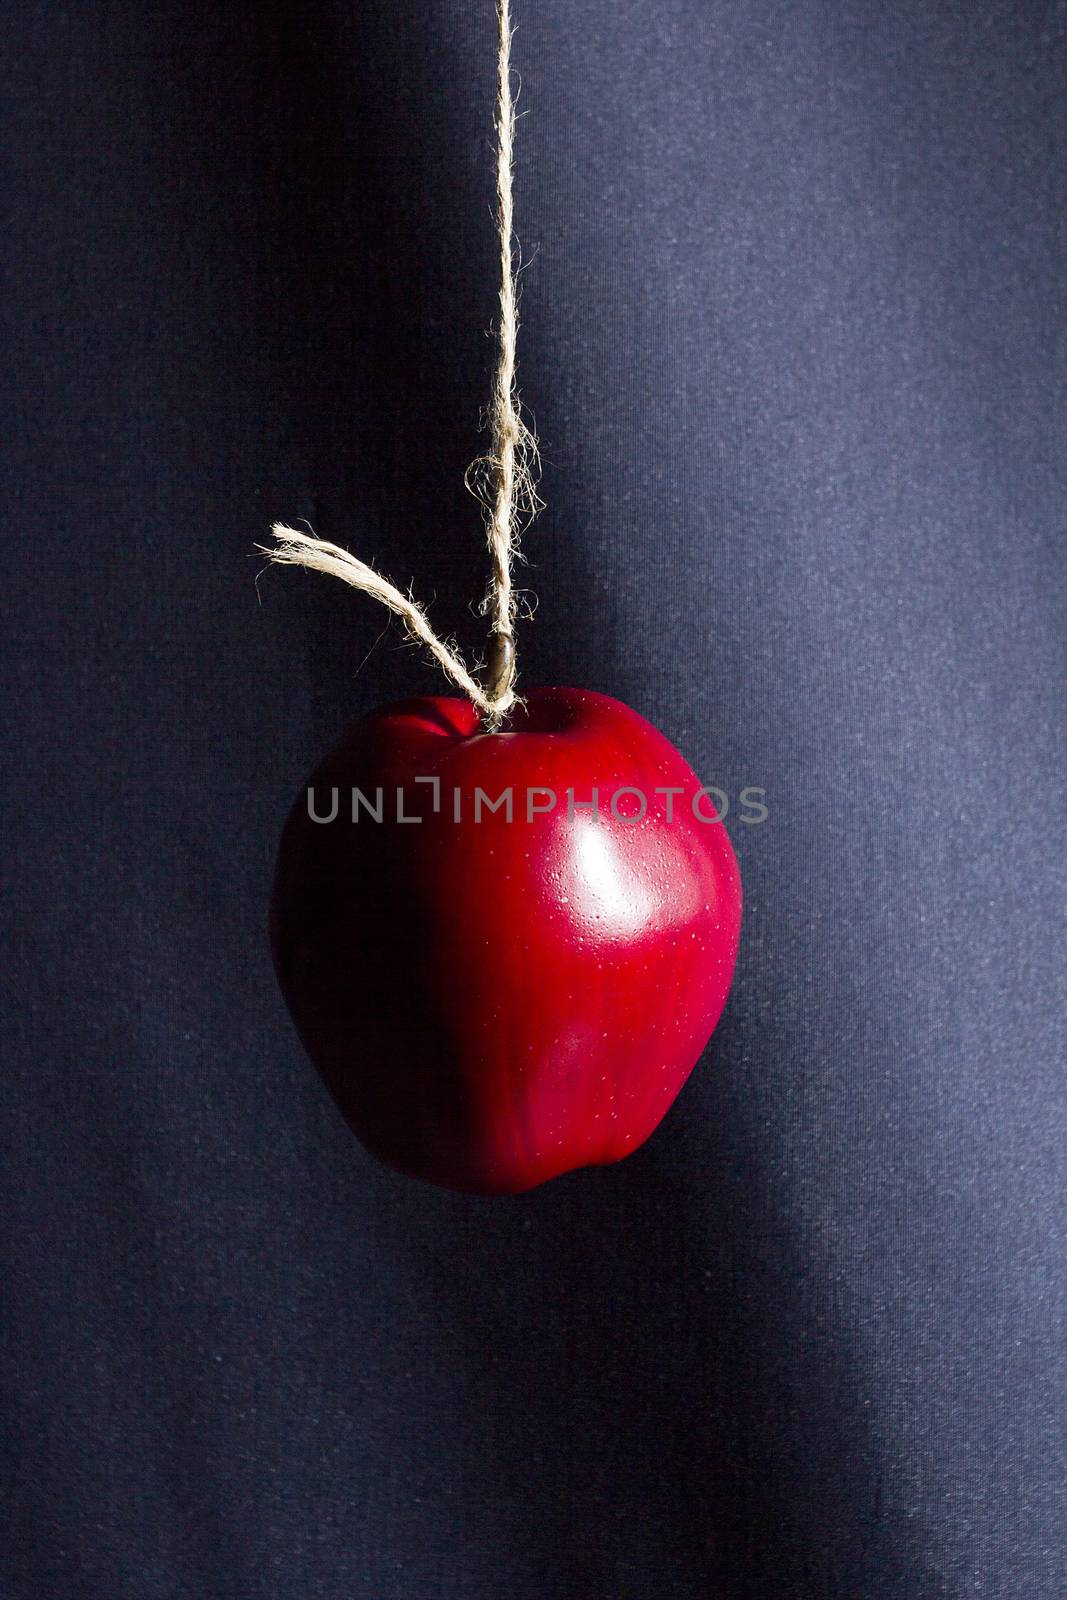 Red ripe apple on a rope on a dark background